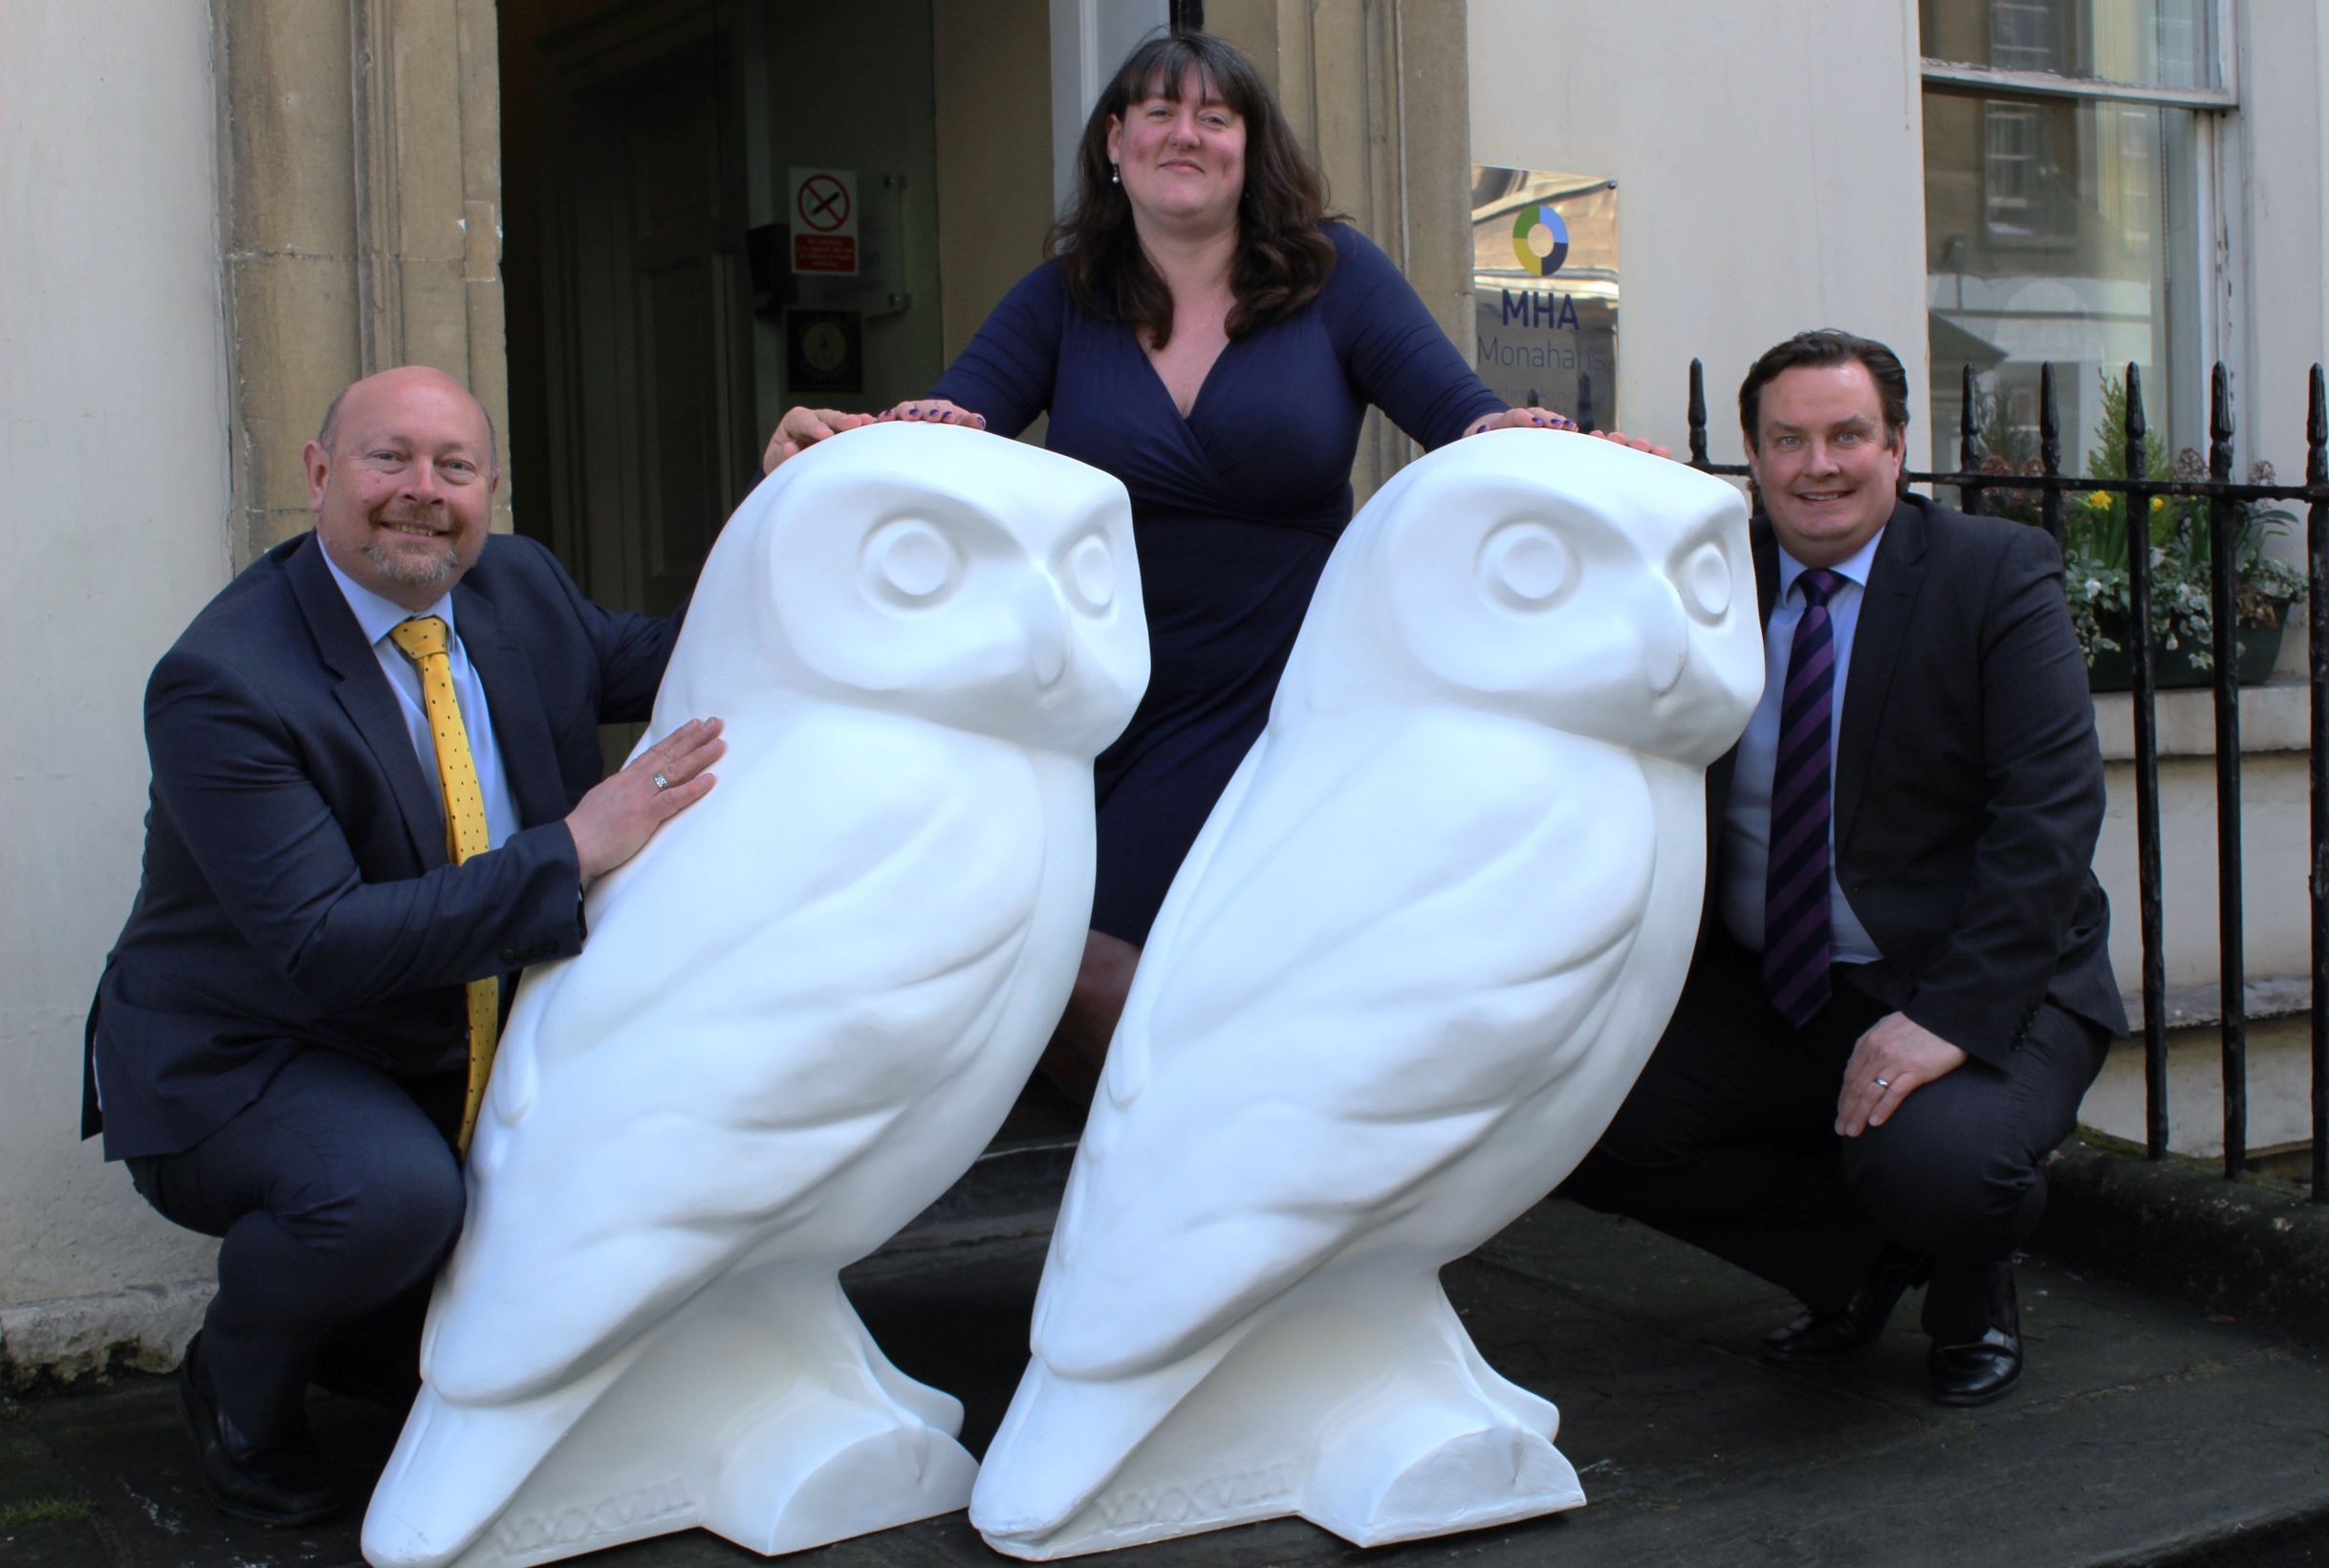 Owls land at MHA Monahans’ Bath office to mark its sponsorship of public sculpture trail